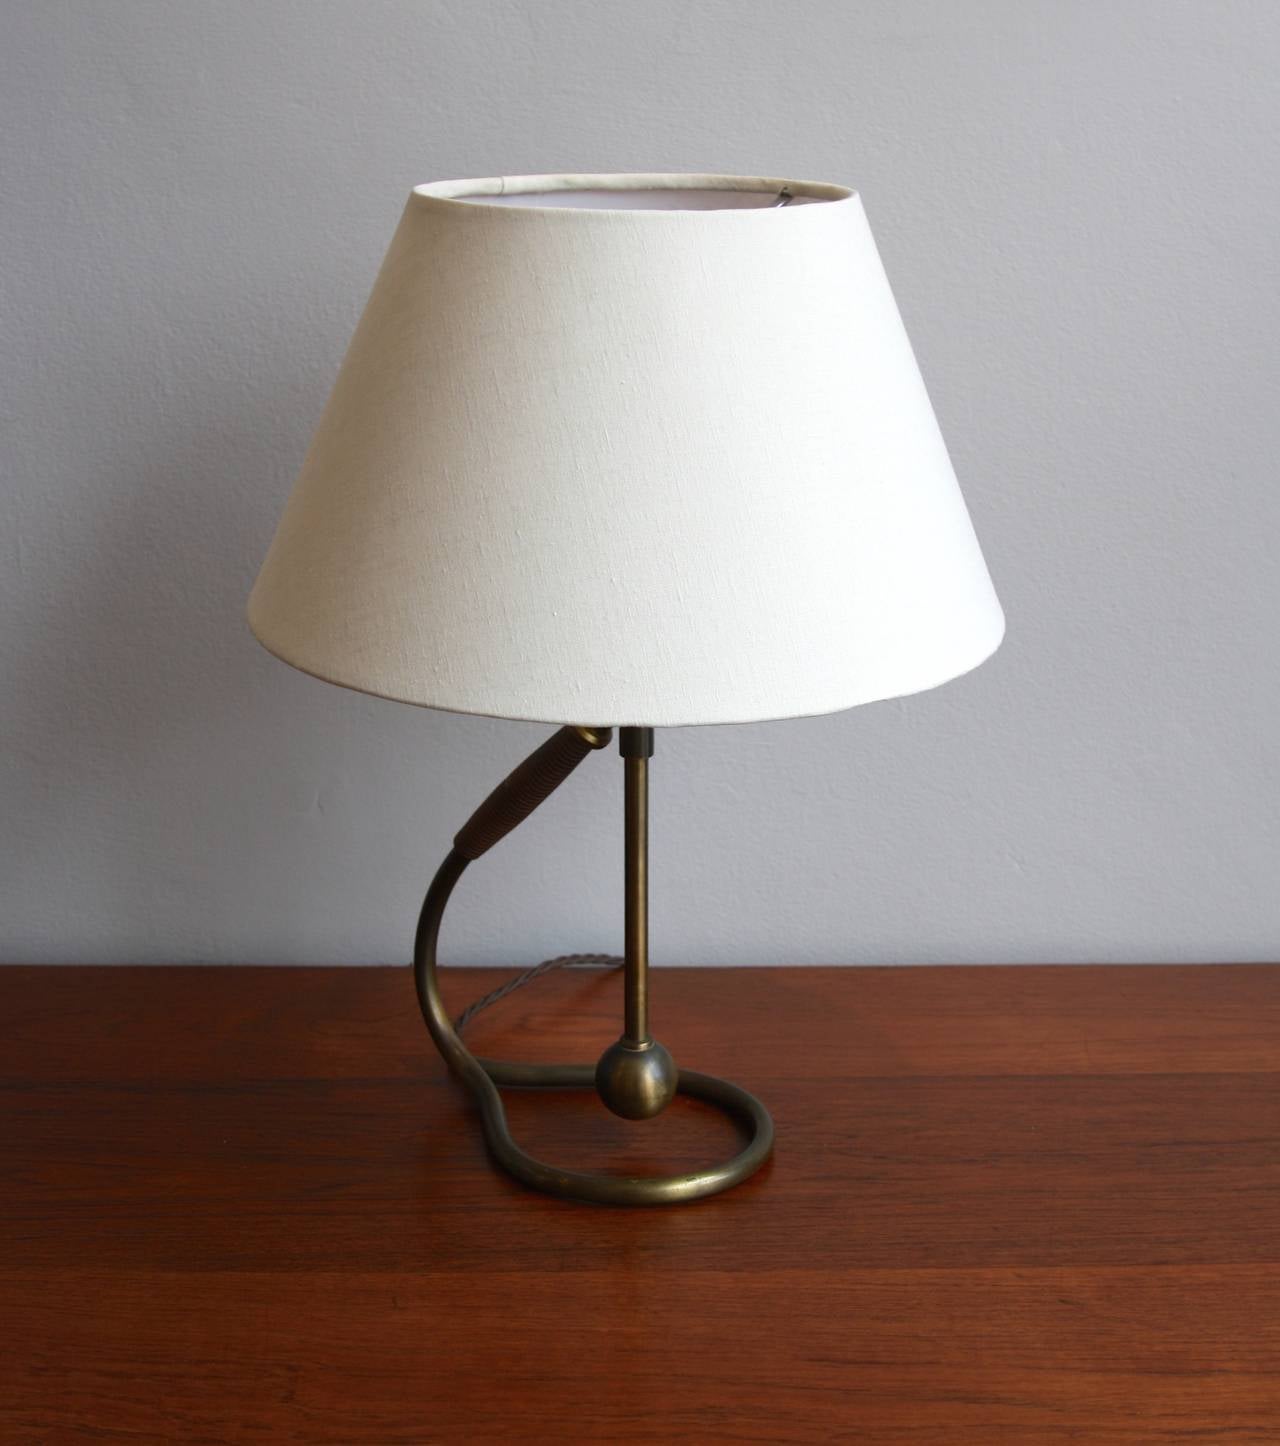 Graceful table or wall lamp made by Kaare Klint, Denmark, 1940s. Brass stem with bakelite handle. Adjustable, it can stand on a flat surface or be hung on a wall.